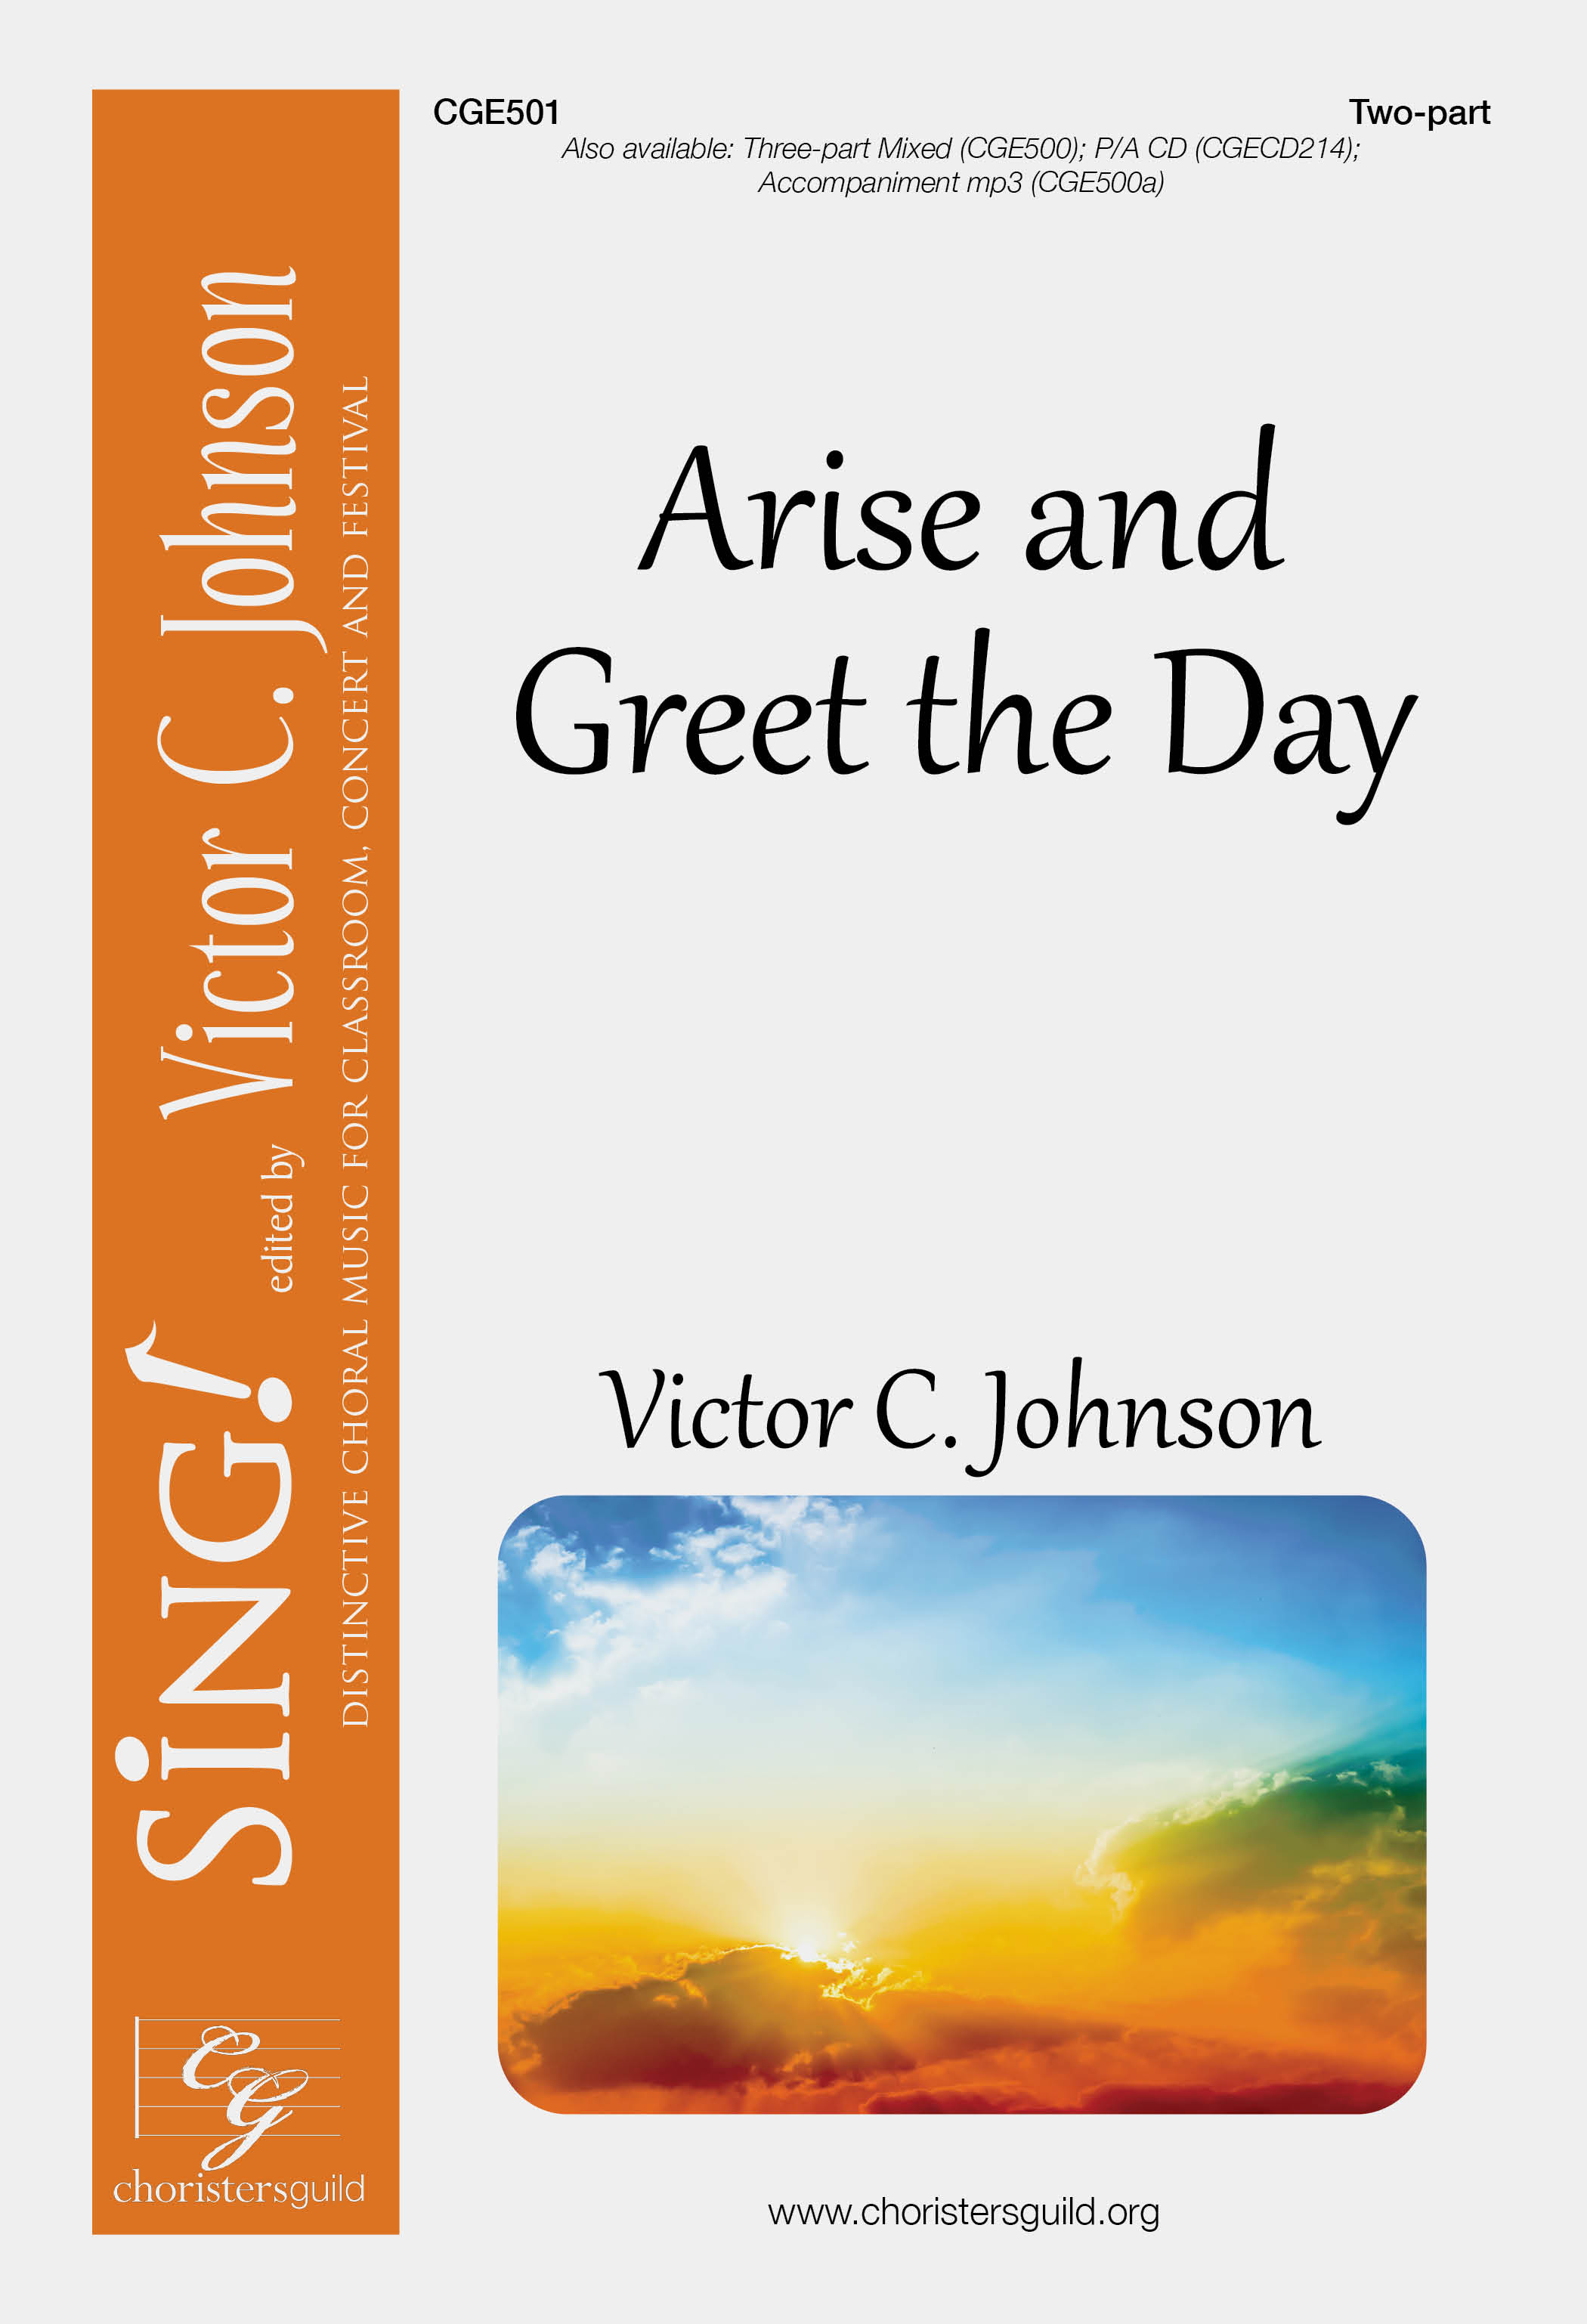 Arise and Greet the Day - Two-part